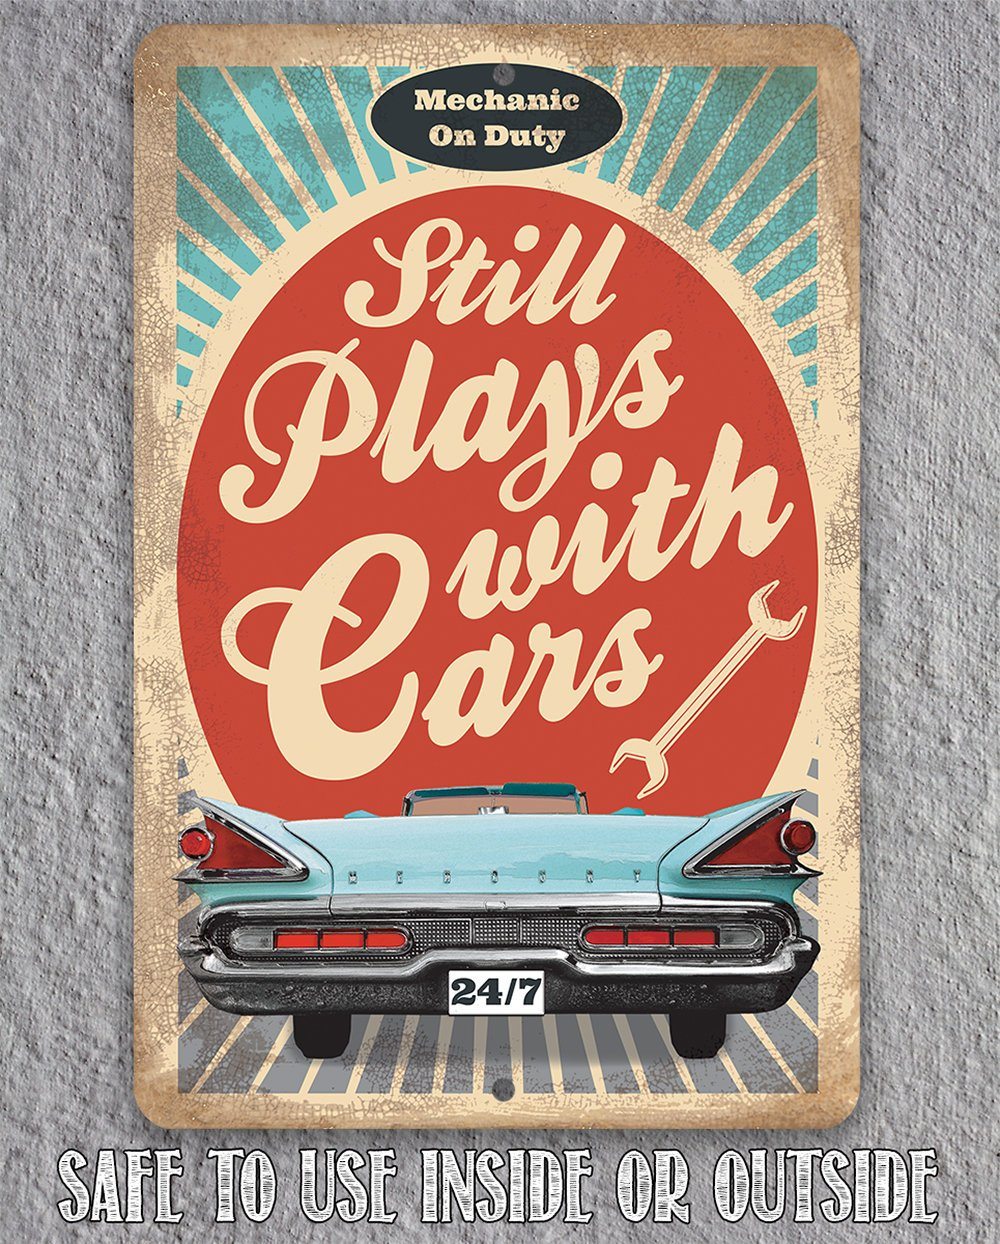 Still Plays With Cars - Metal Sign | Lone Star Art.